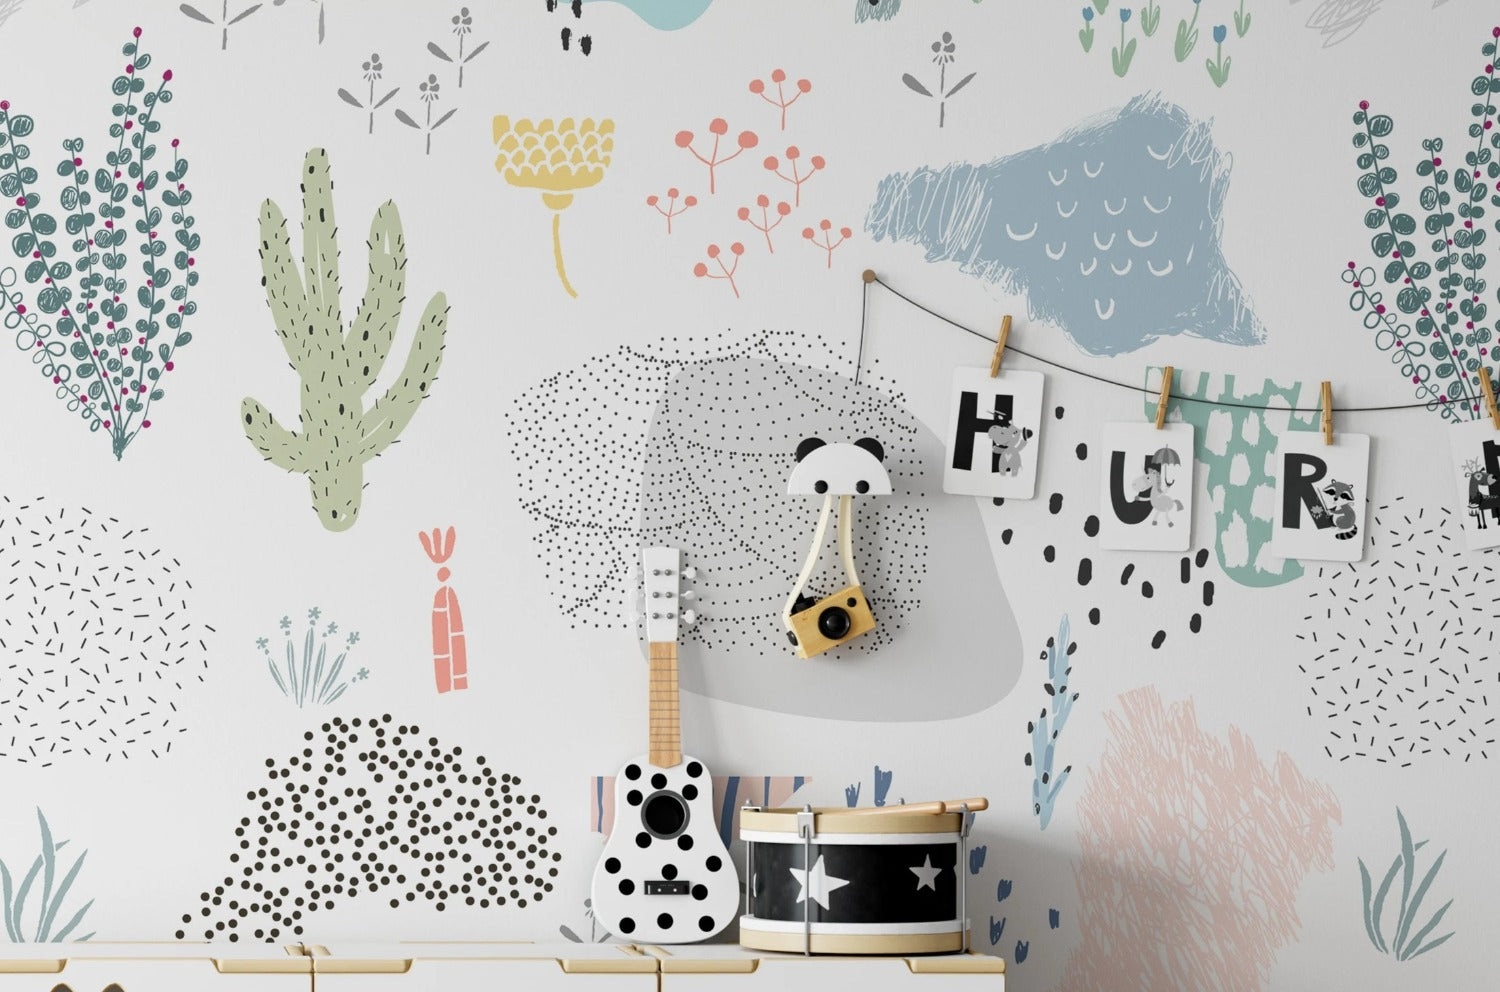 Kids' play area featuring Kids Wallpaper - Doodles with whimsical doodles of various plants and abstract shapes in pastel colors, creating a fun and creative environment.